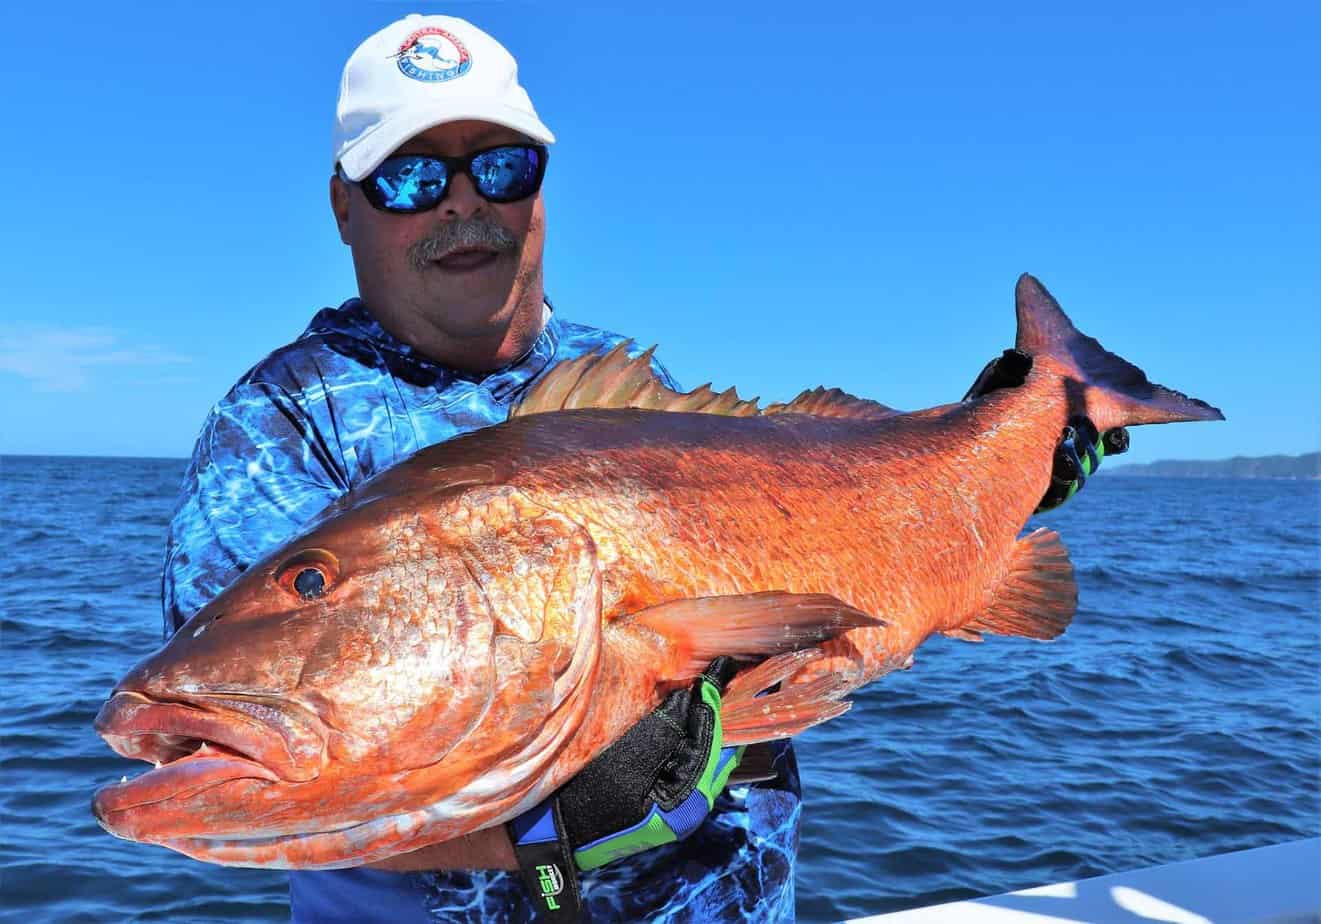 11-time Central America Fishing guest Frank with a big cubera snapper in Panama